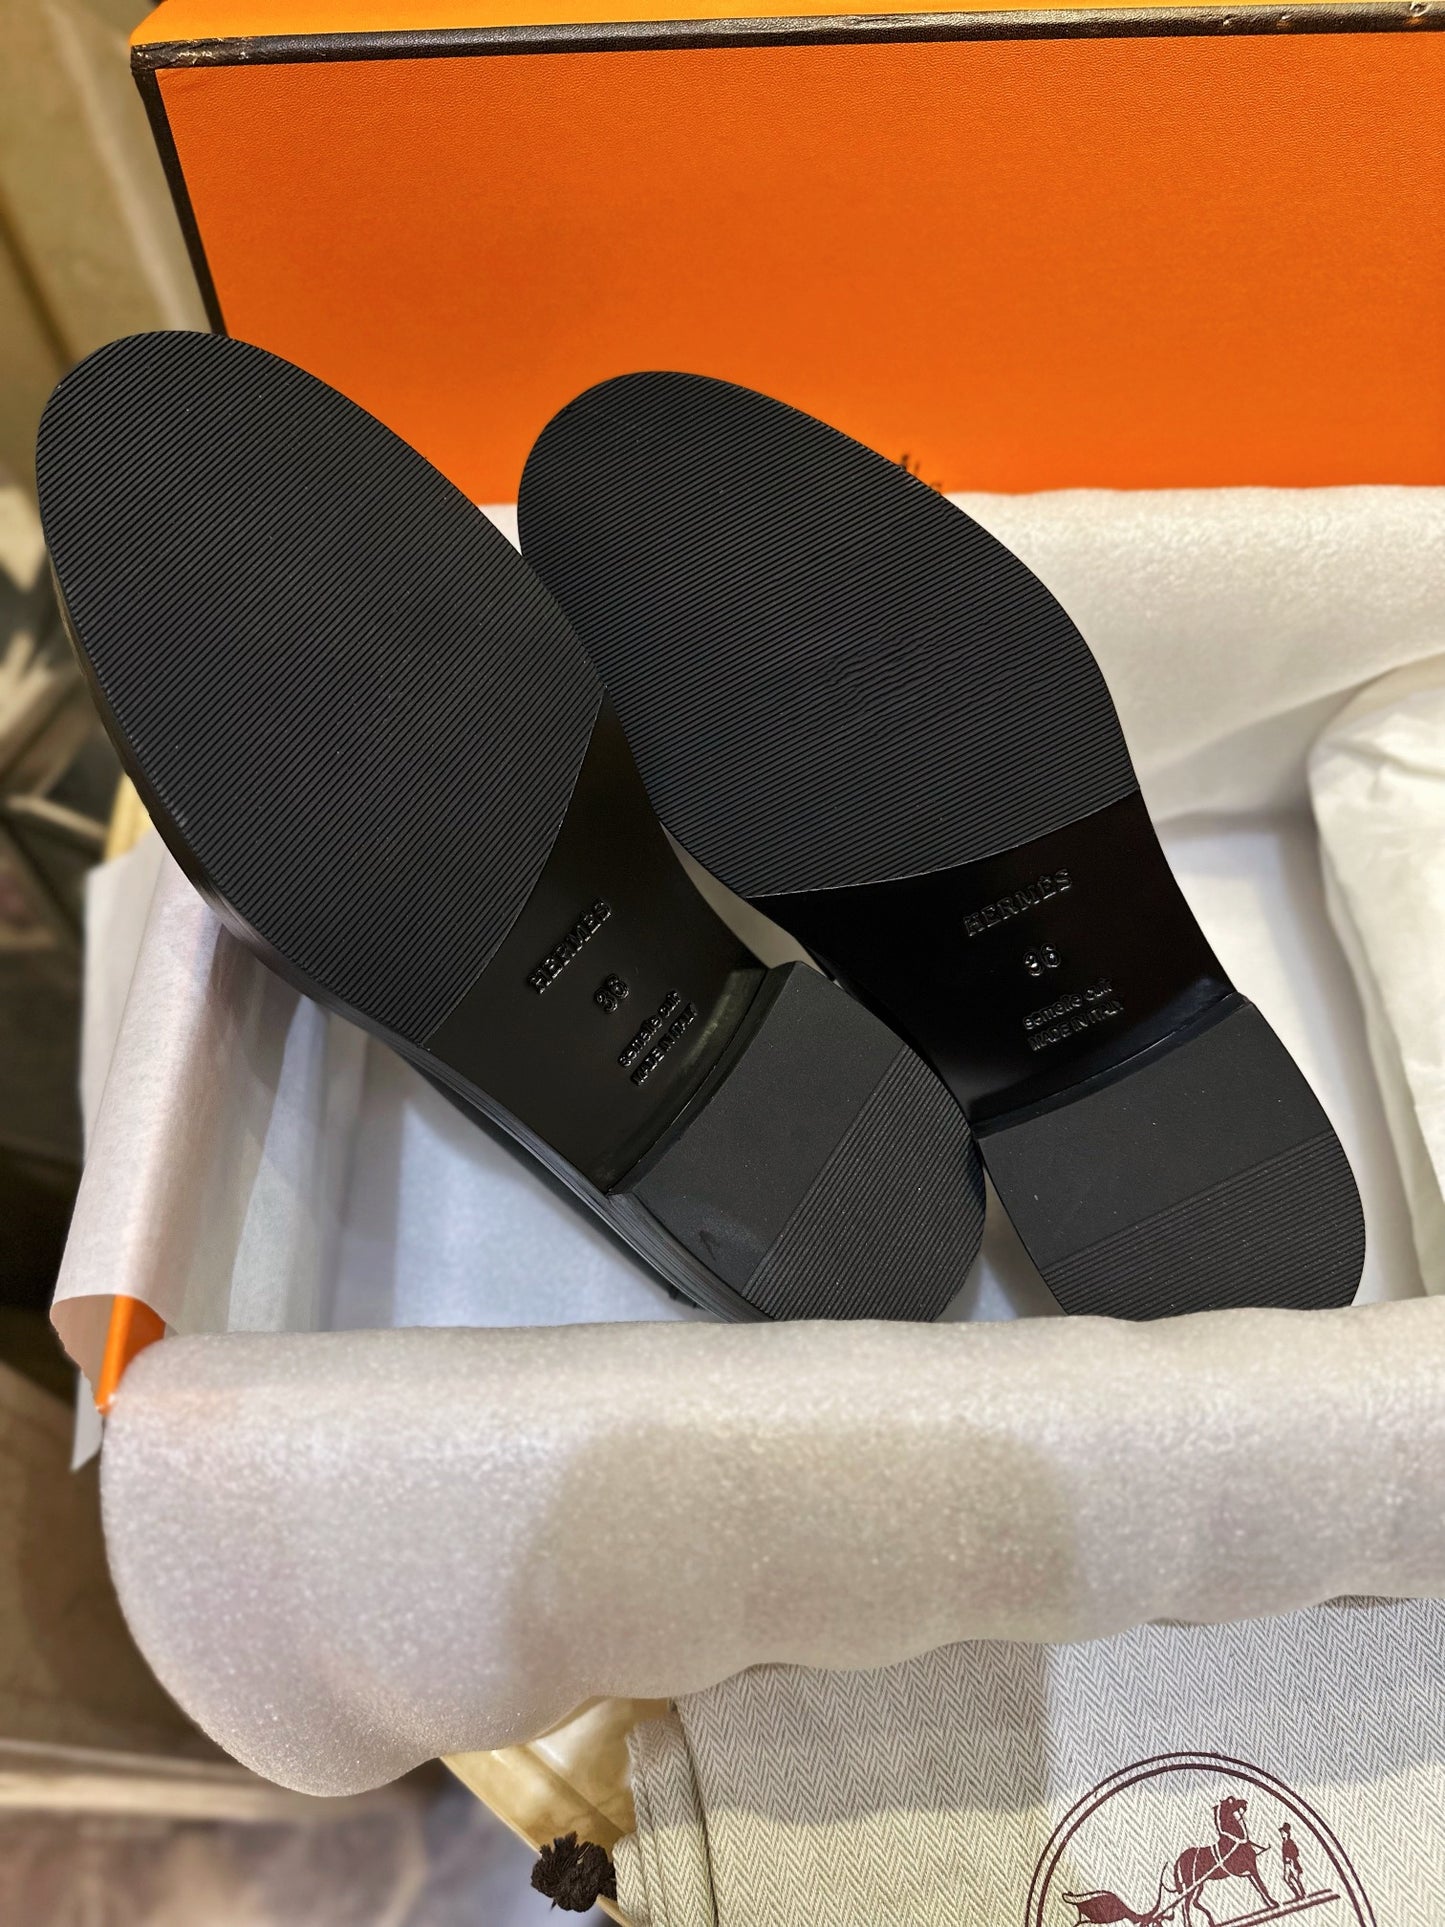 HERMES LOAFERS